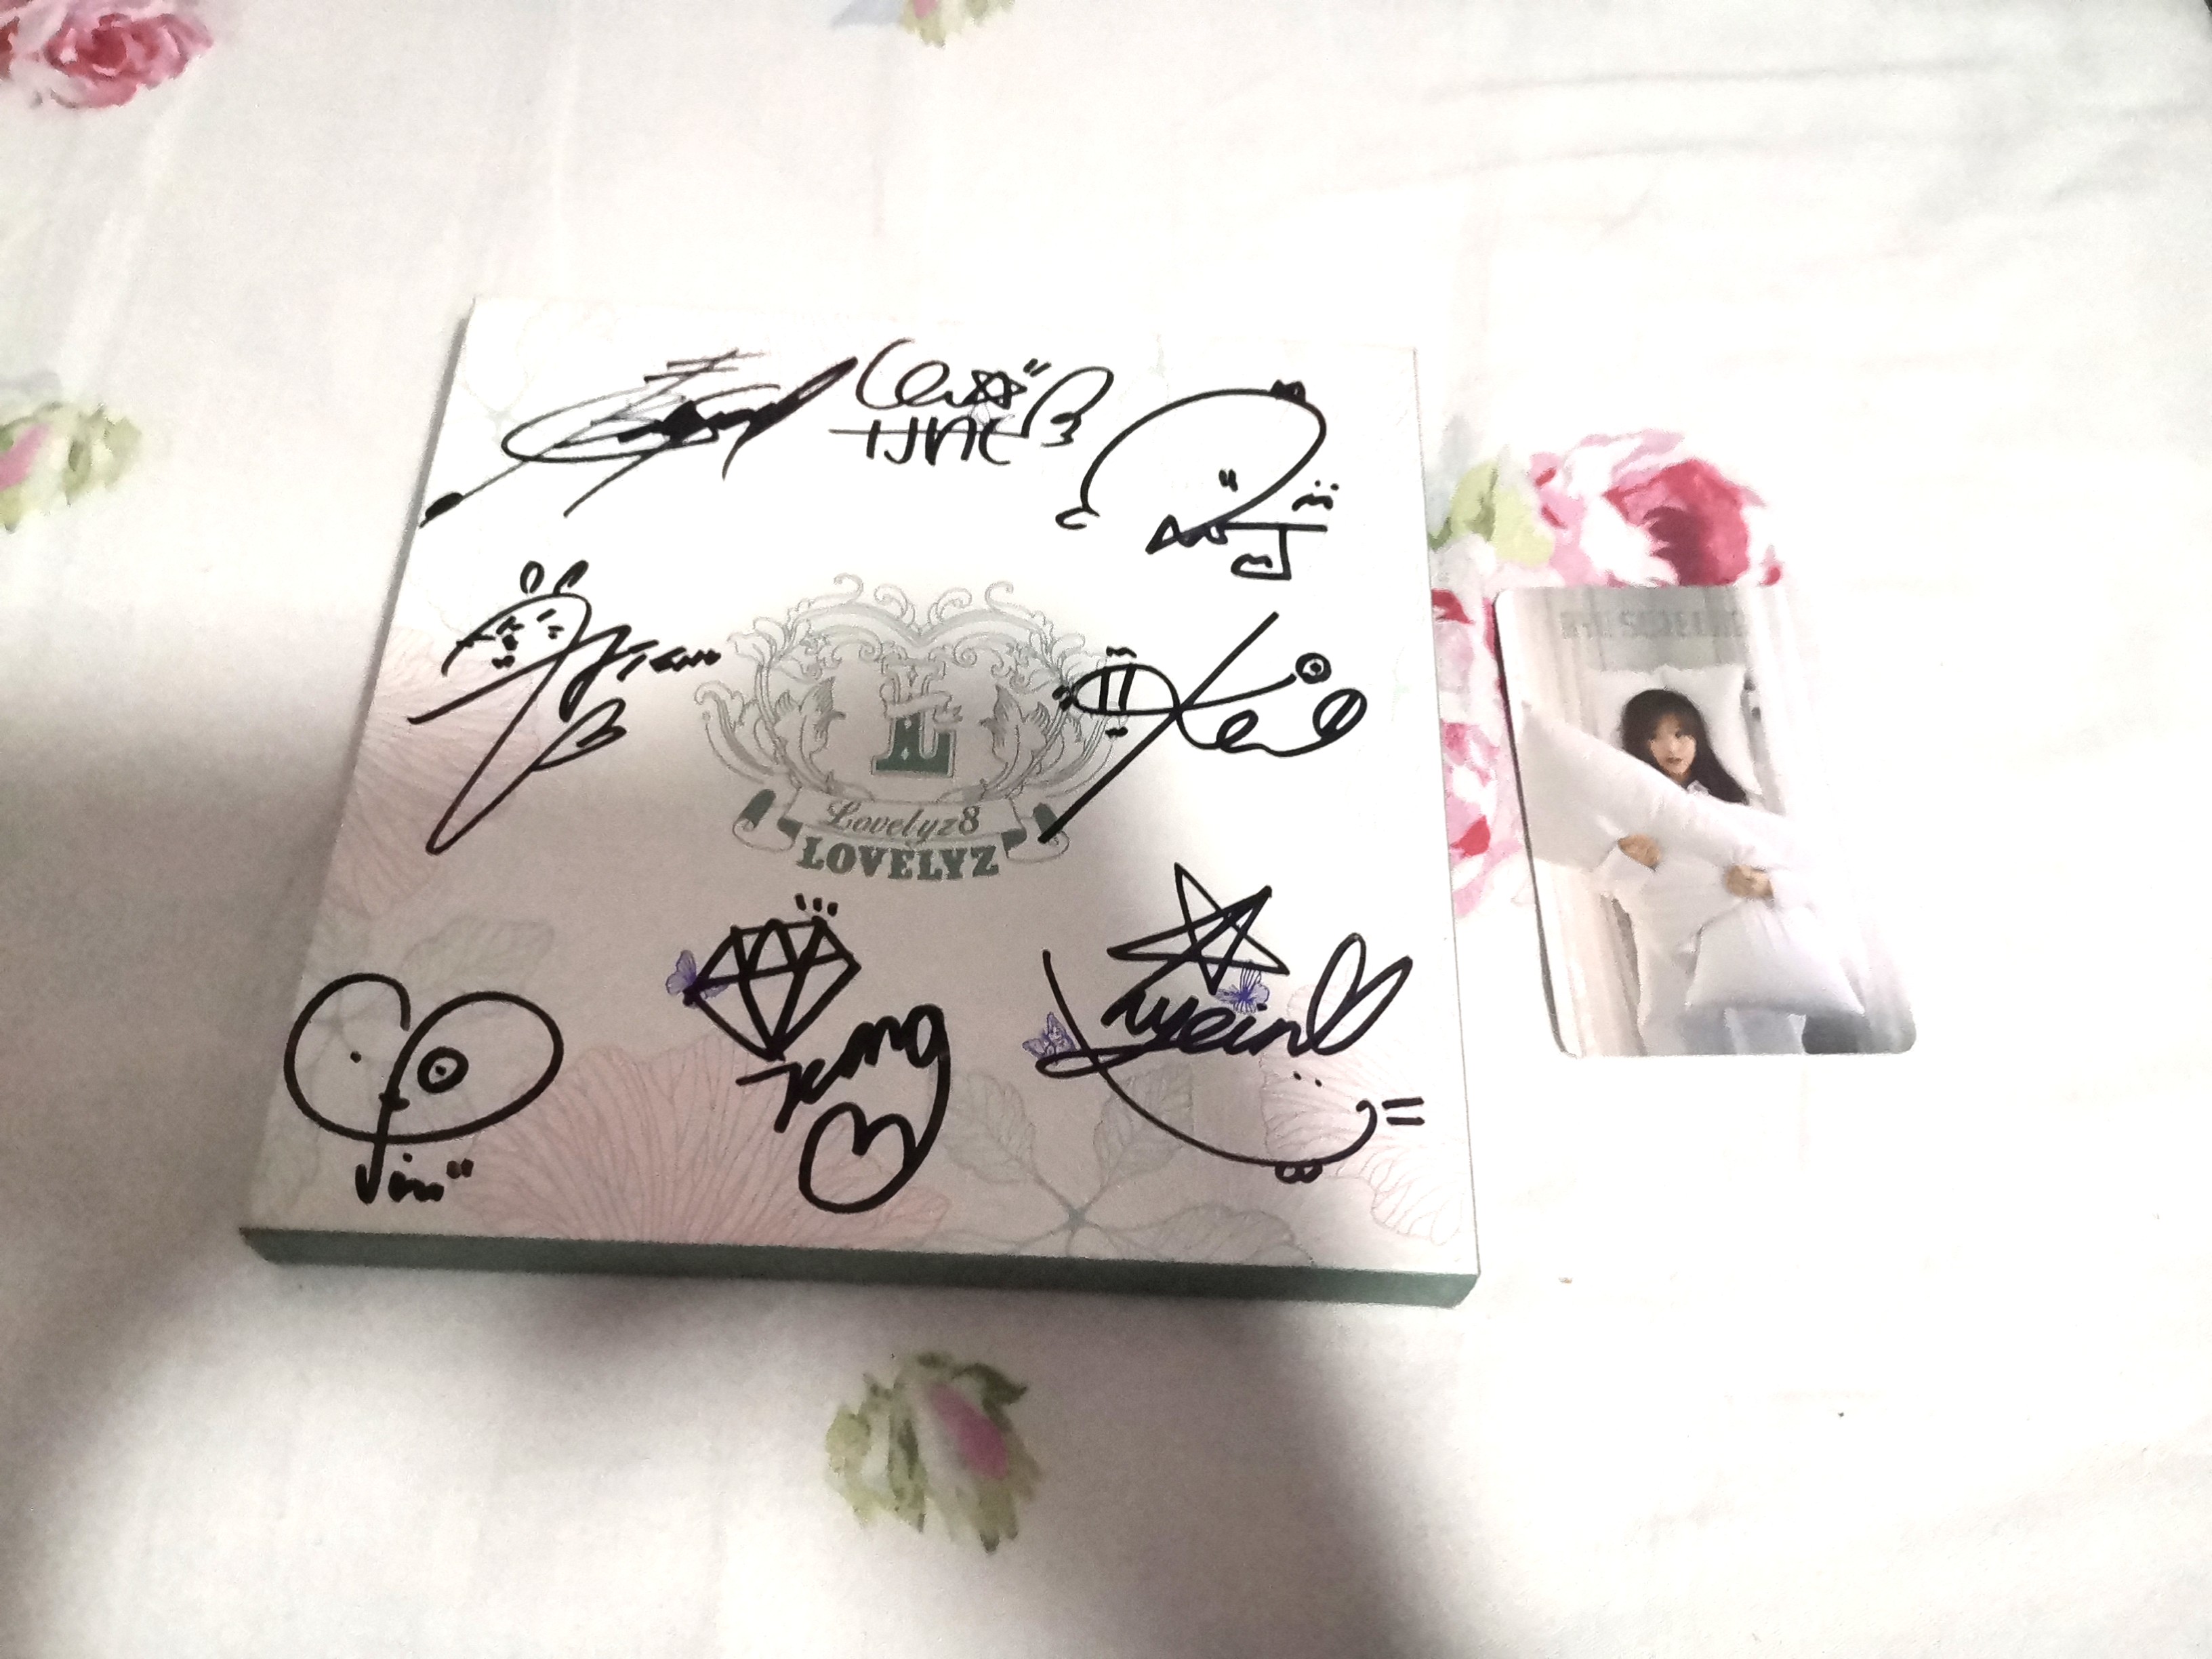 Buying A Signed Album From Mwave: A Matter Of Giving The Benefit